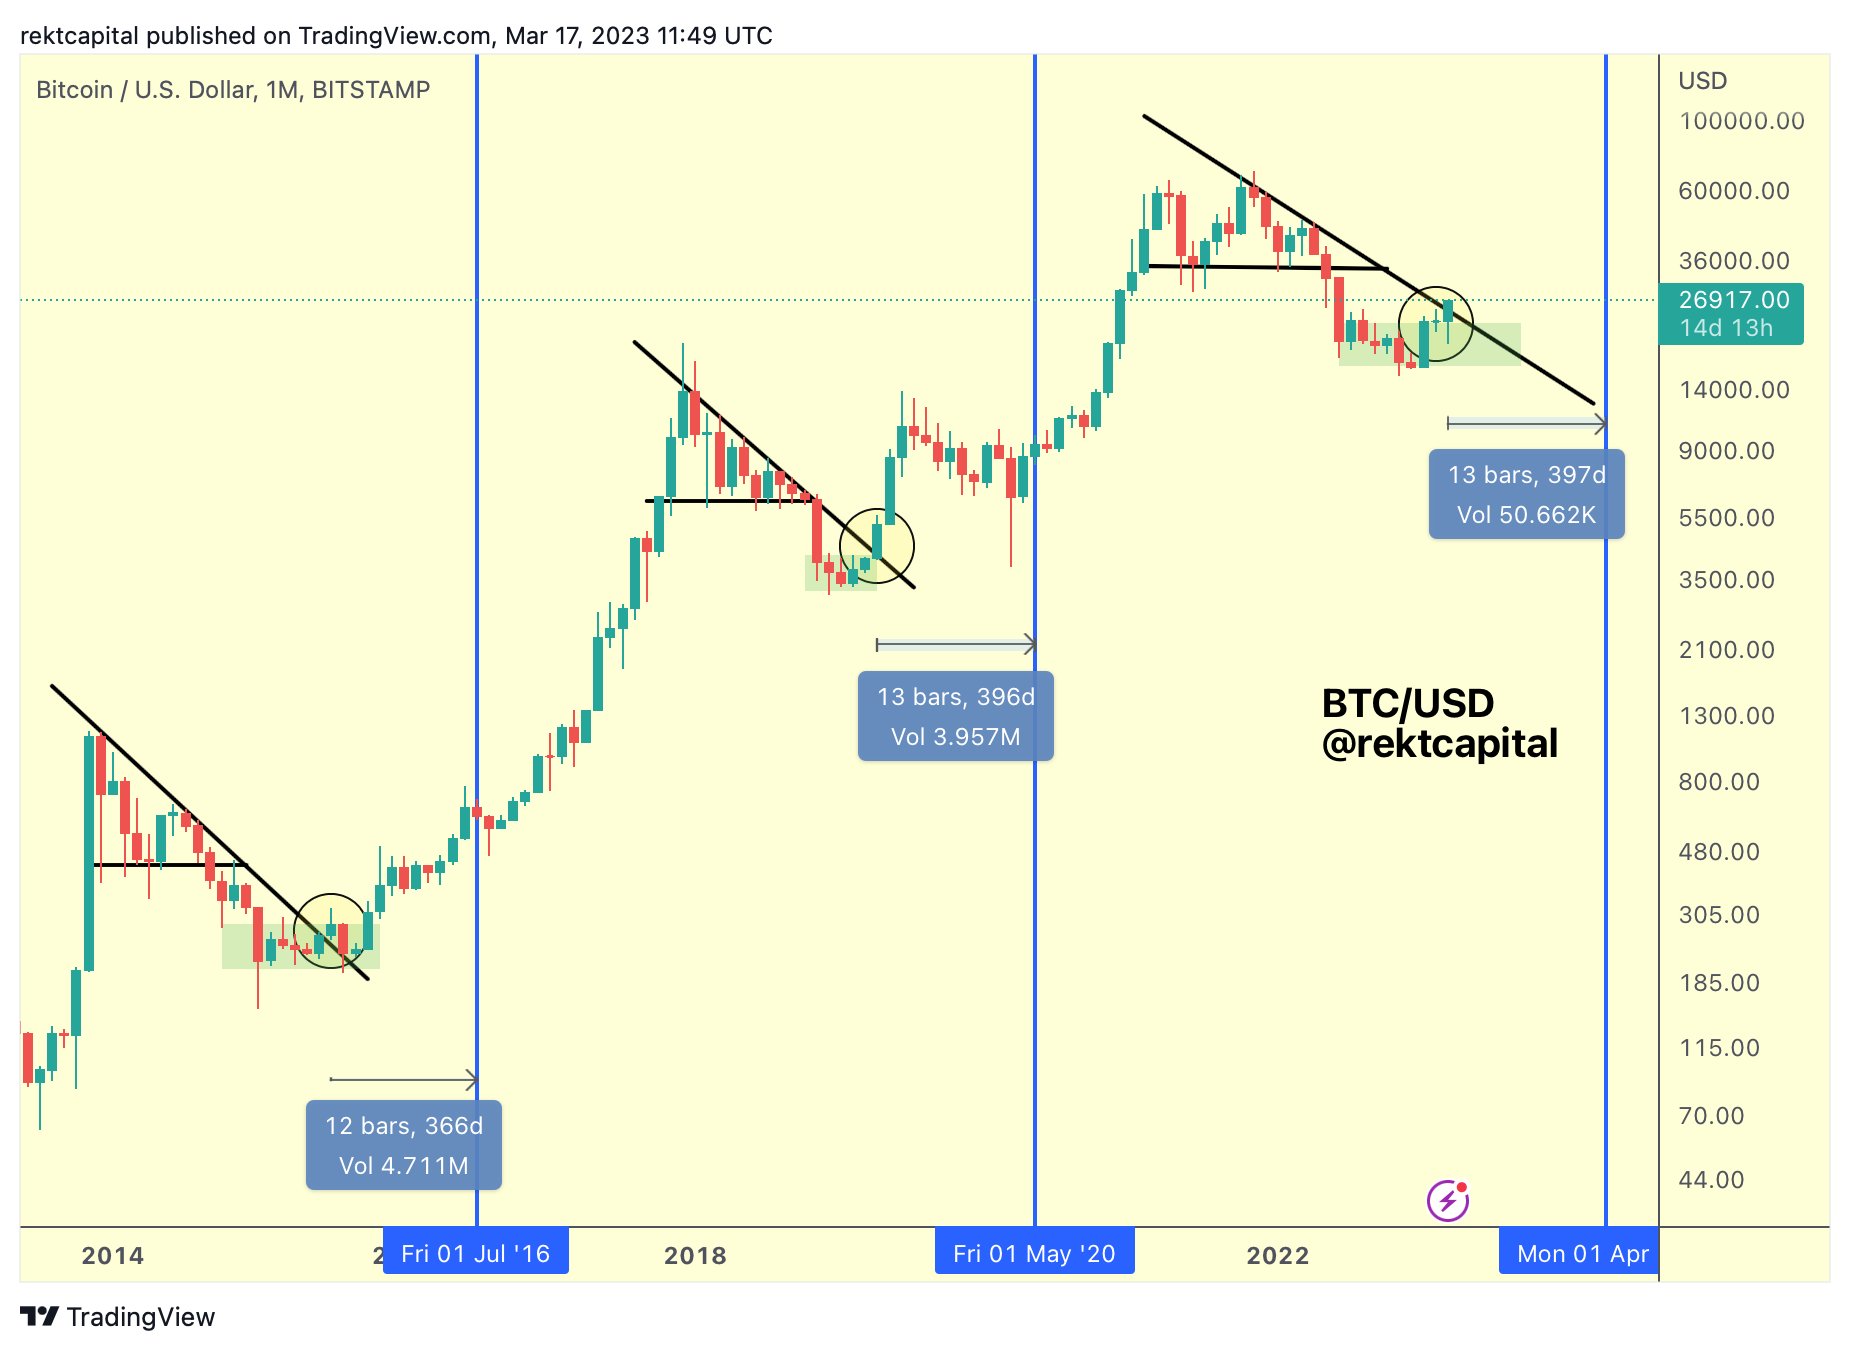 Bitcoin breakout before halving